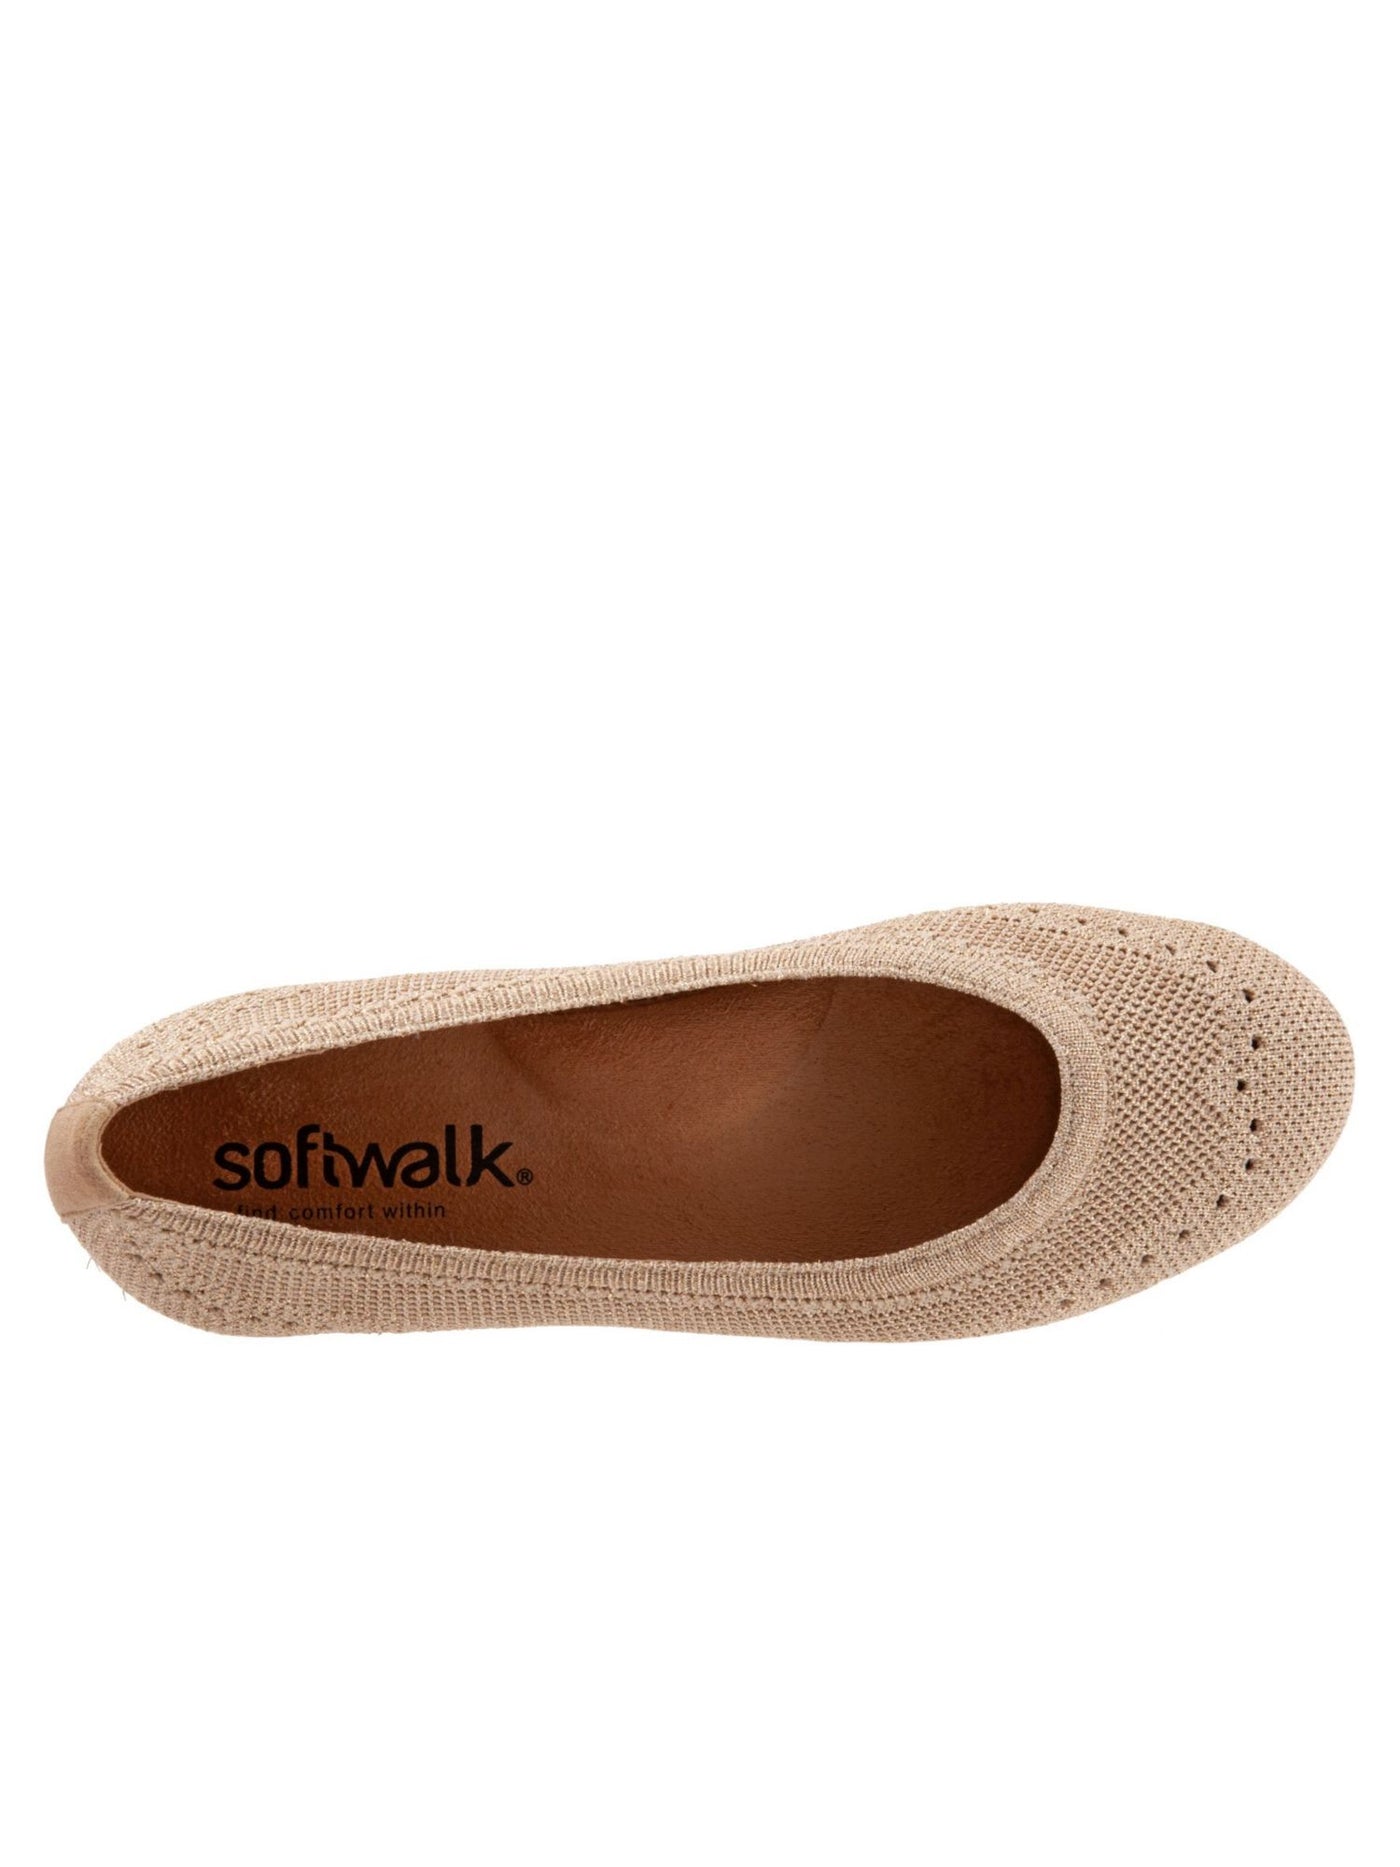 SOFT WALK Womens Gold Knit Removable Insole Breathable Arch Support Cushioned Santorini Round Toe Slip On Ballet Flats 7 W